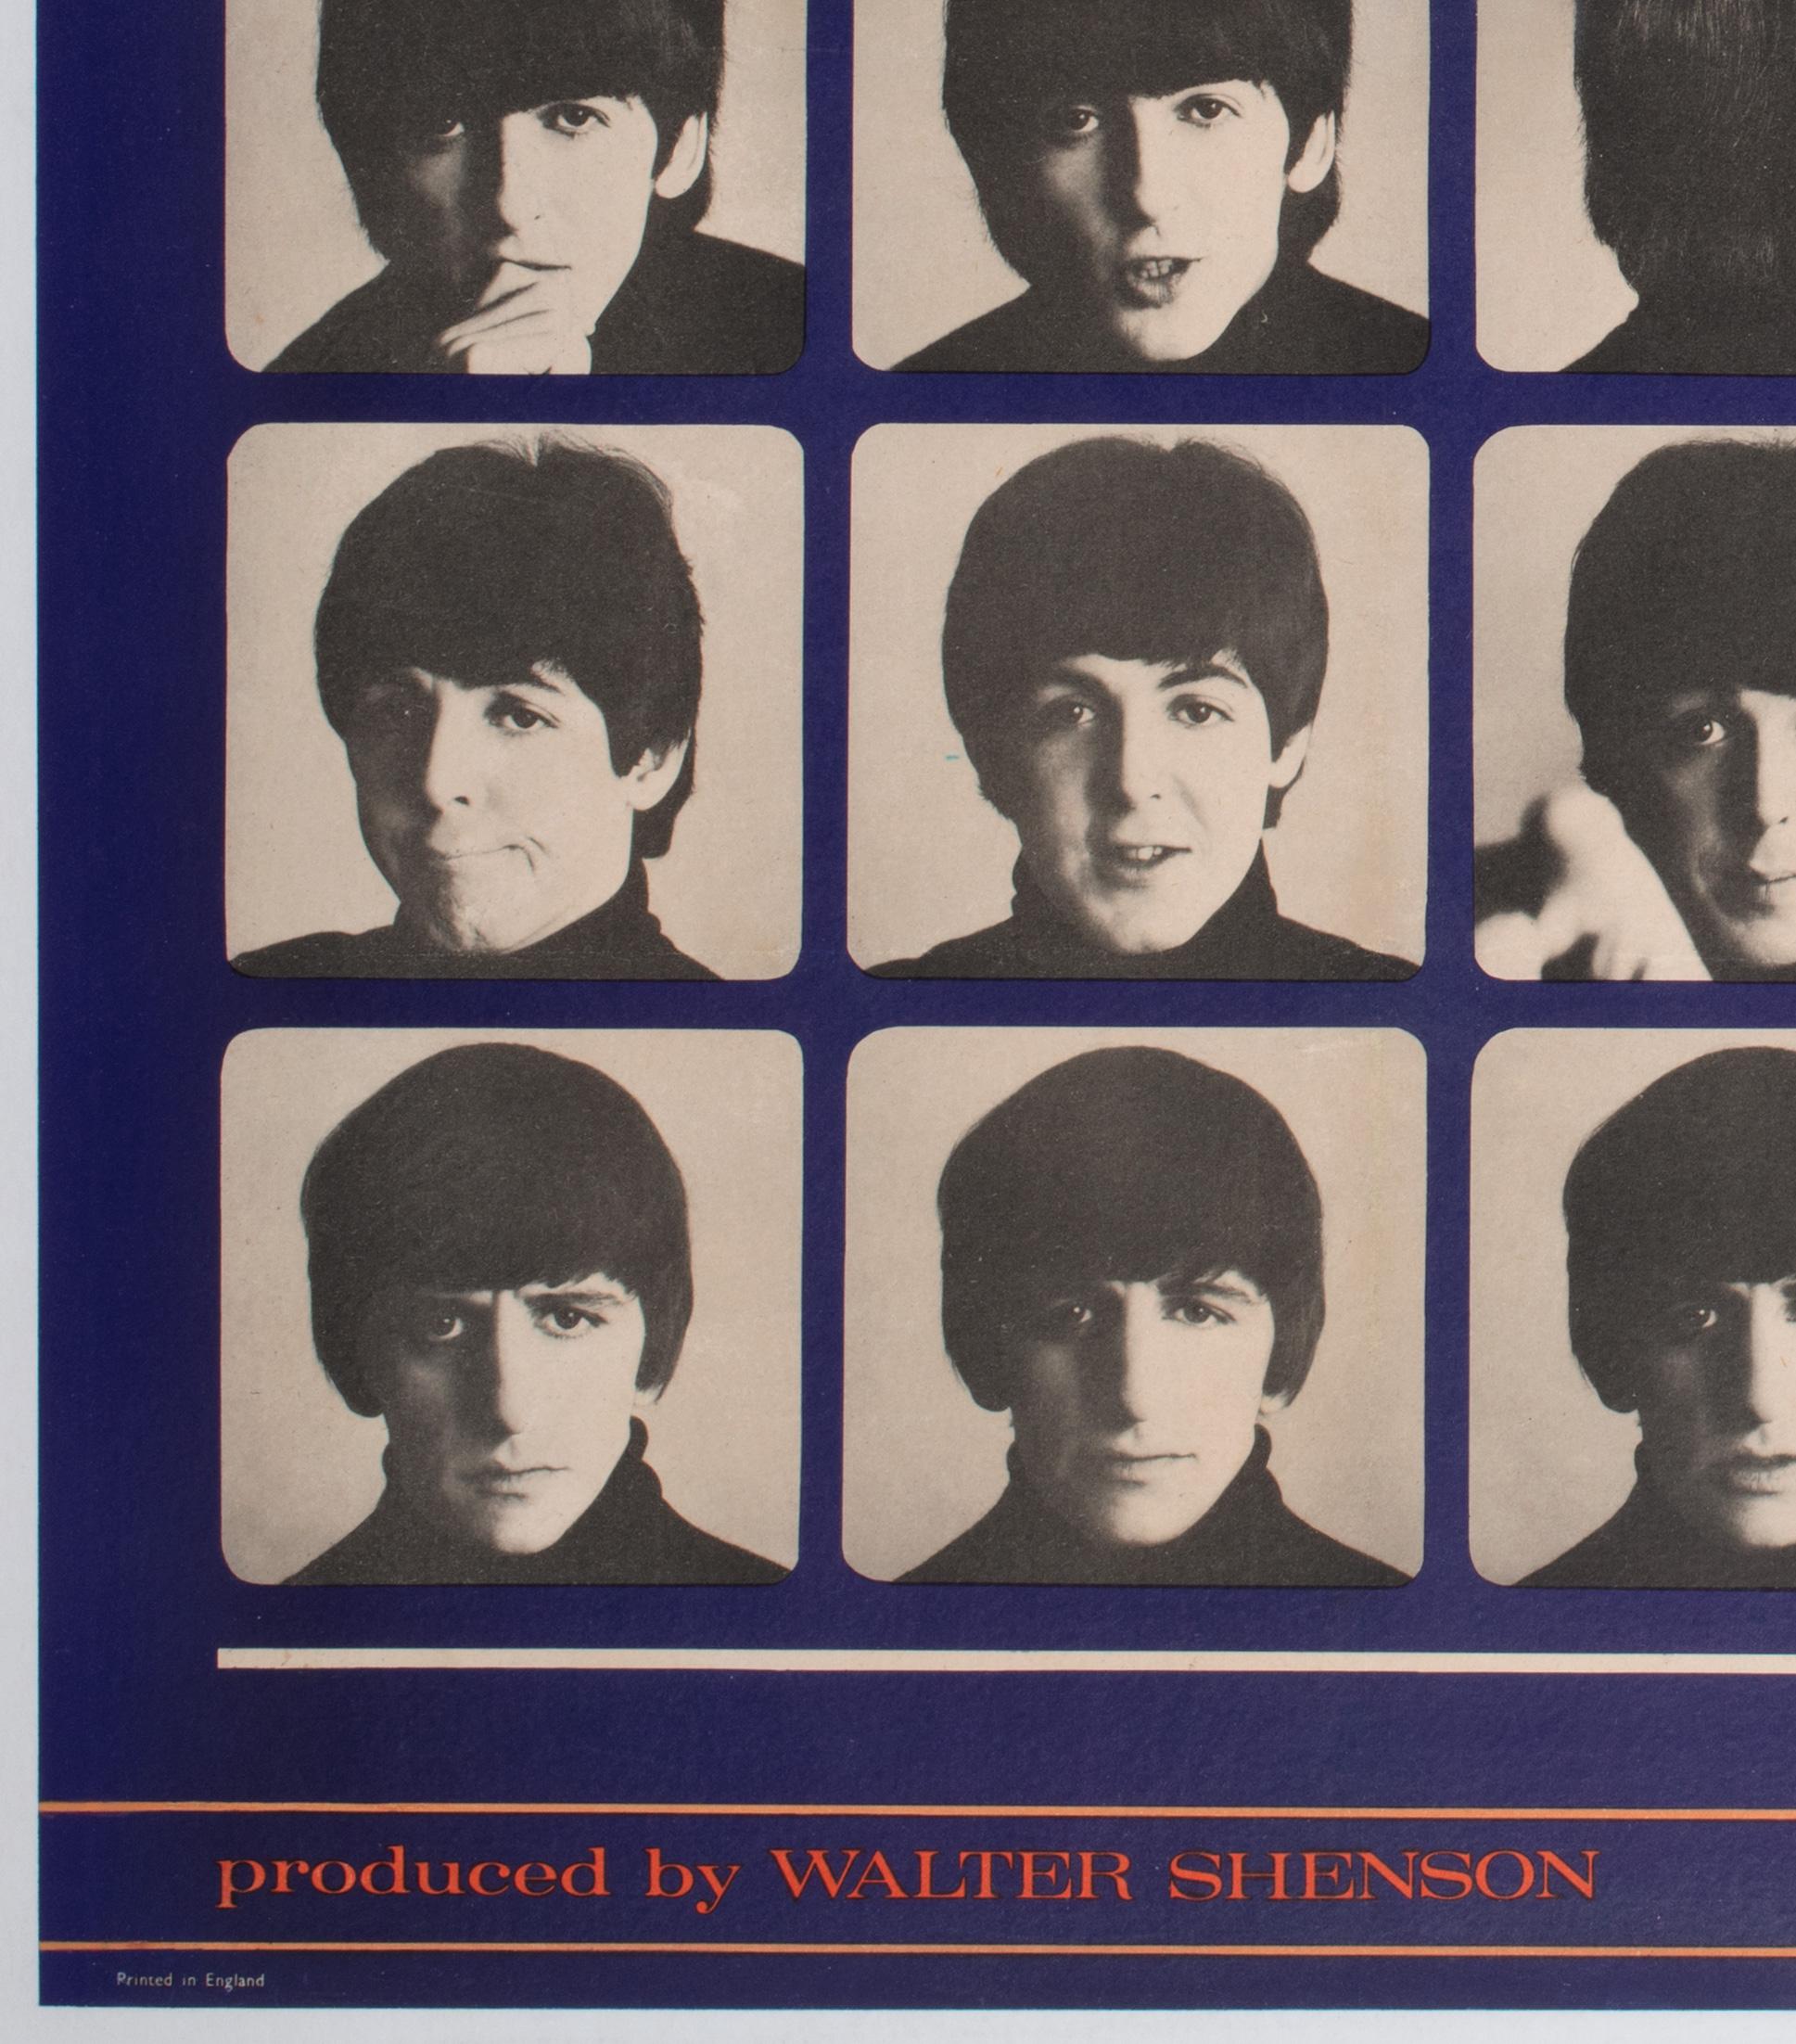 Linen A Hard Day's Night 1964 UK Quad Film Poster, THE BEATLES